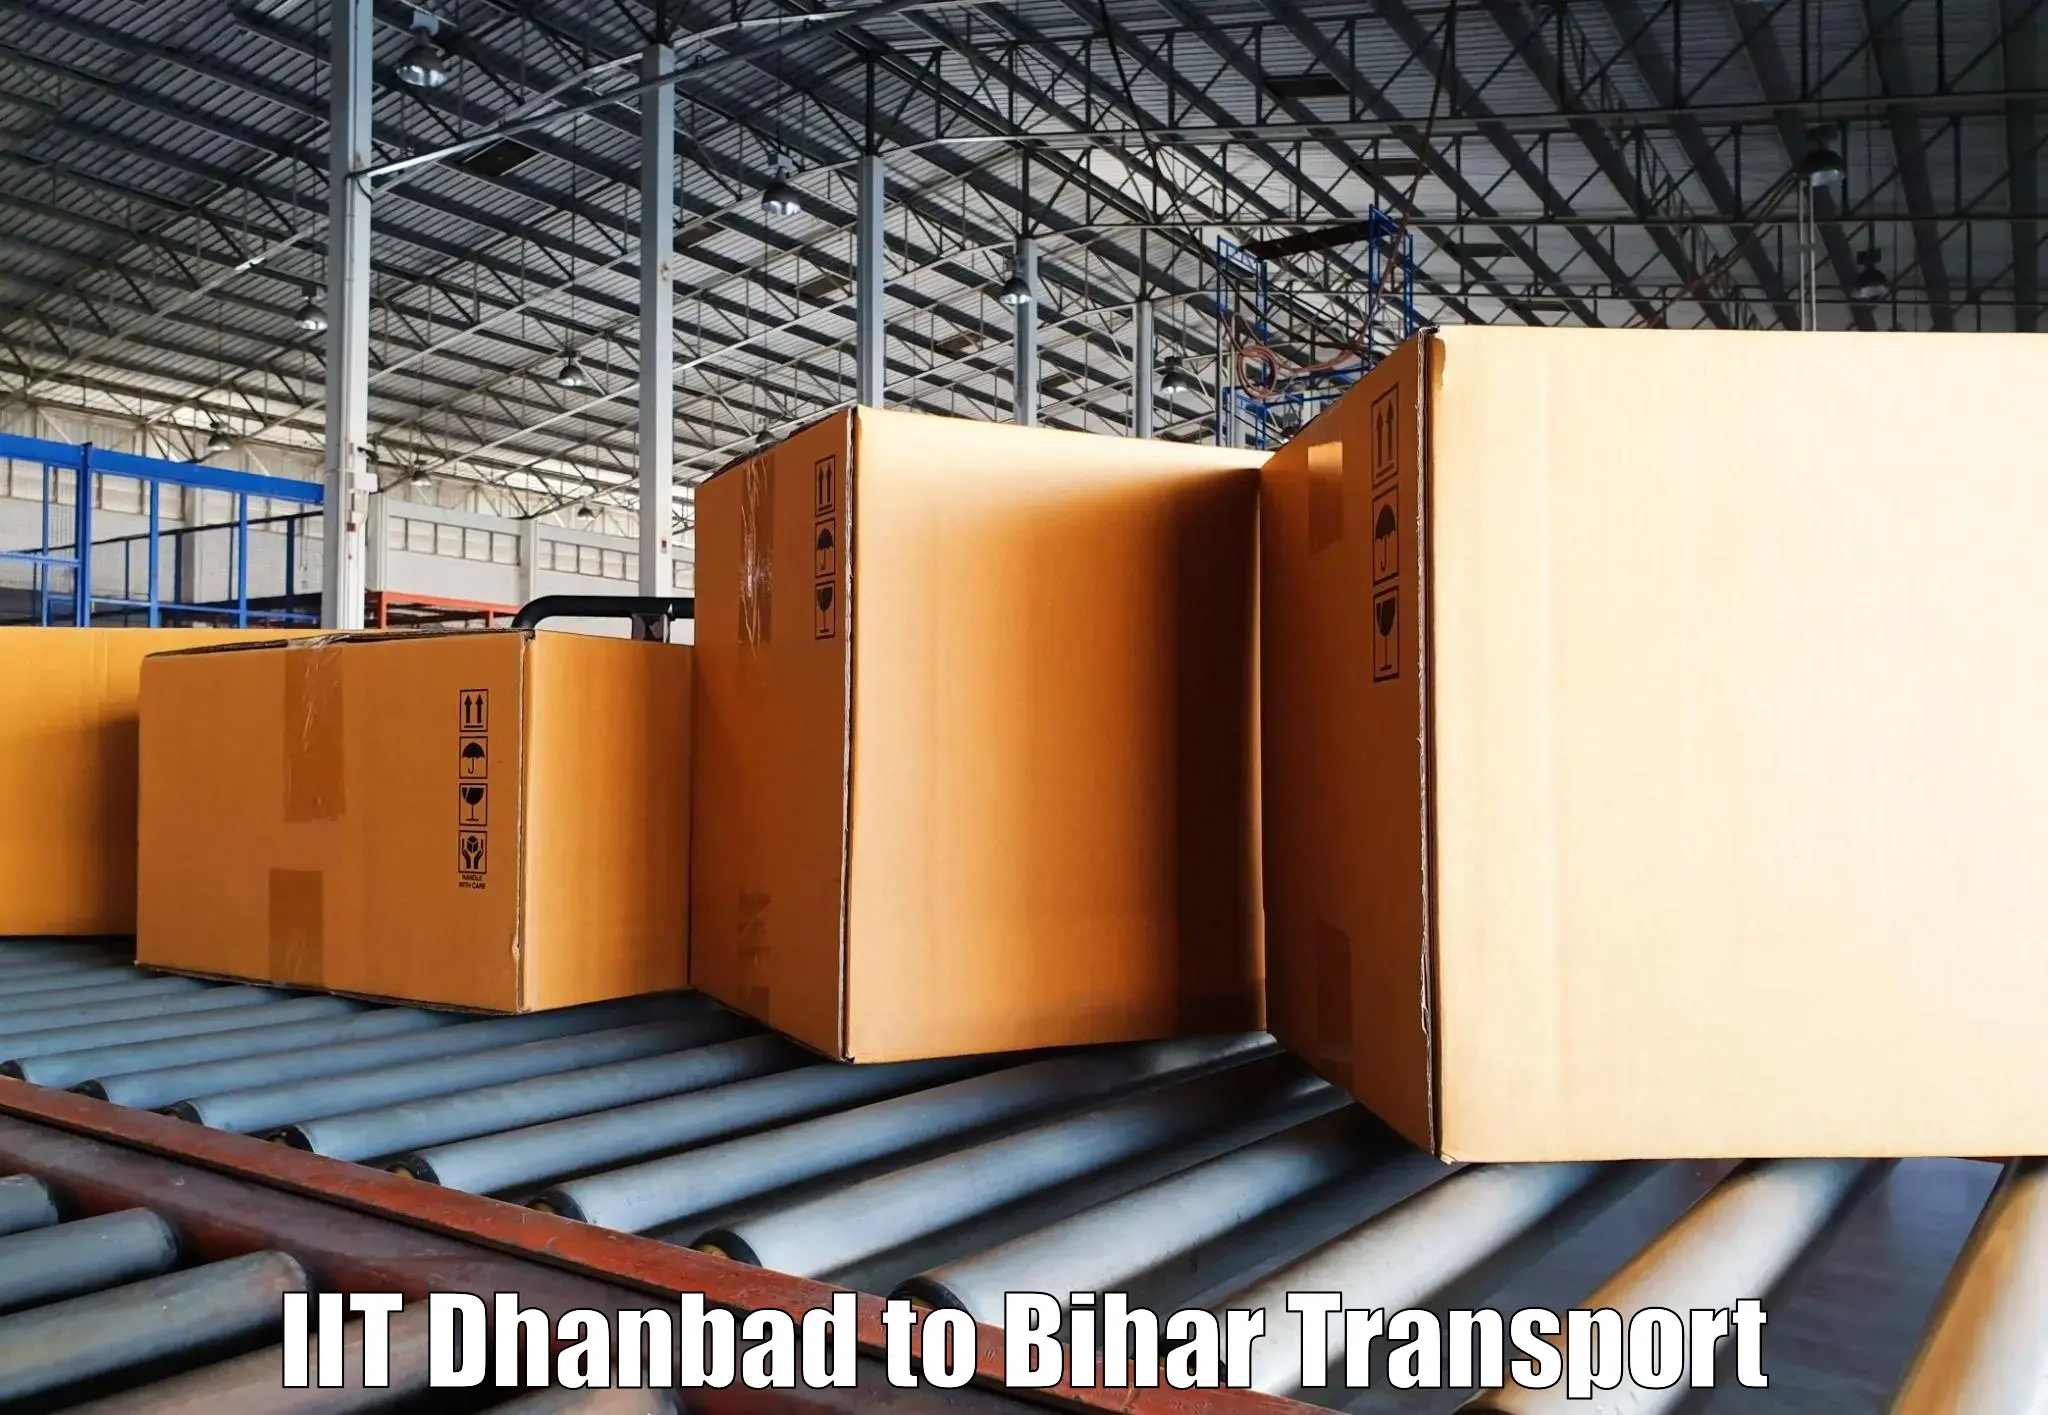 Container transport service IIT Dhanbad to Vaishali